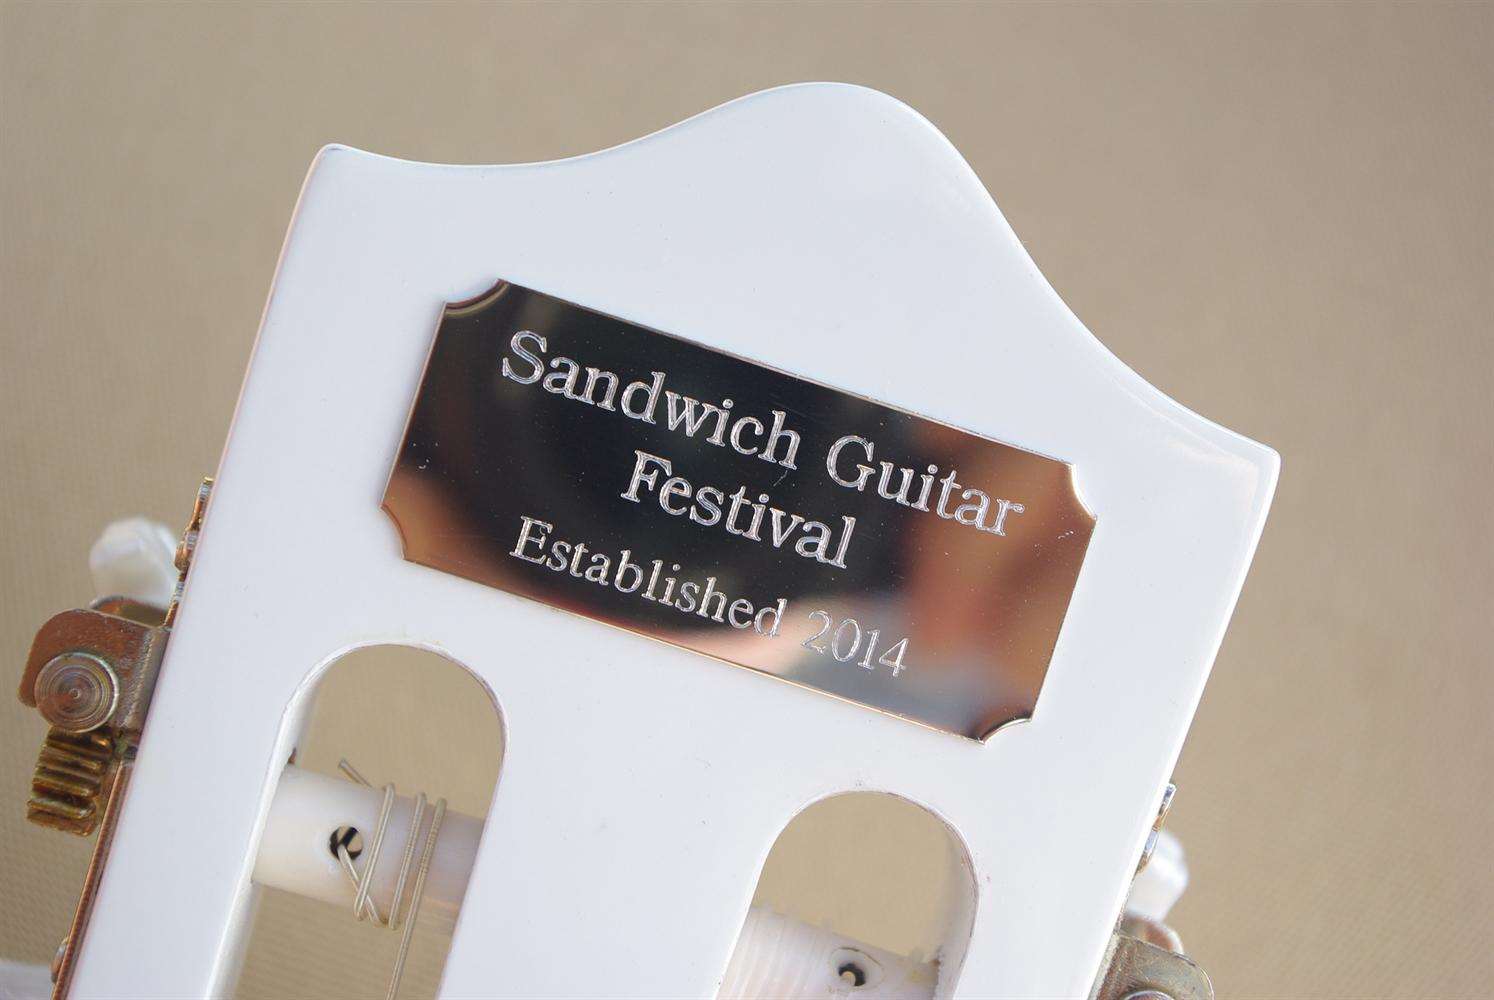 Guitarists and audiences can sign the guitar for a donation